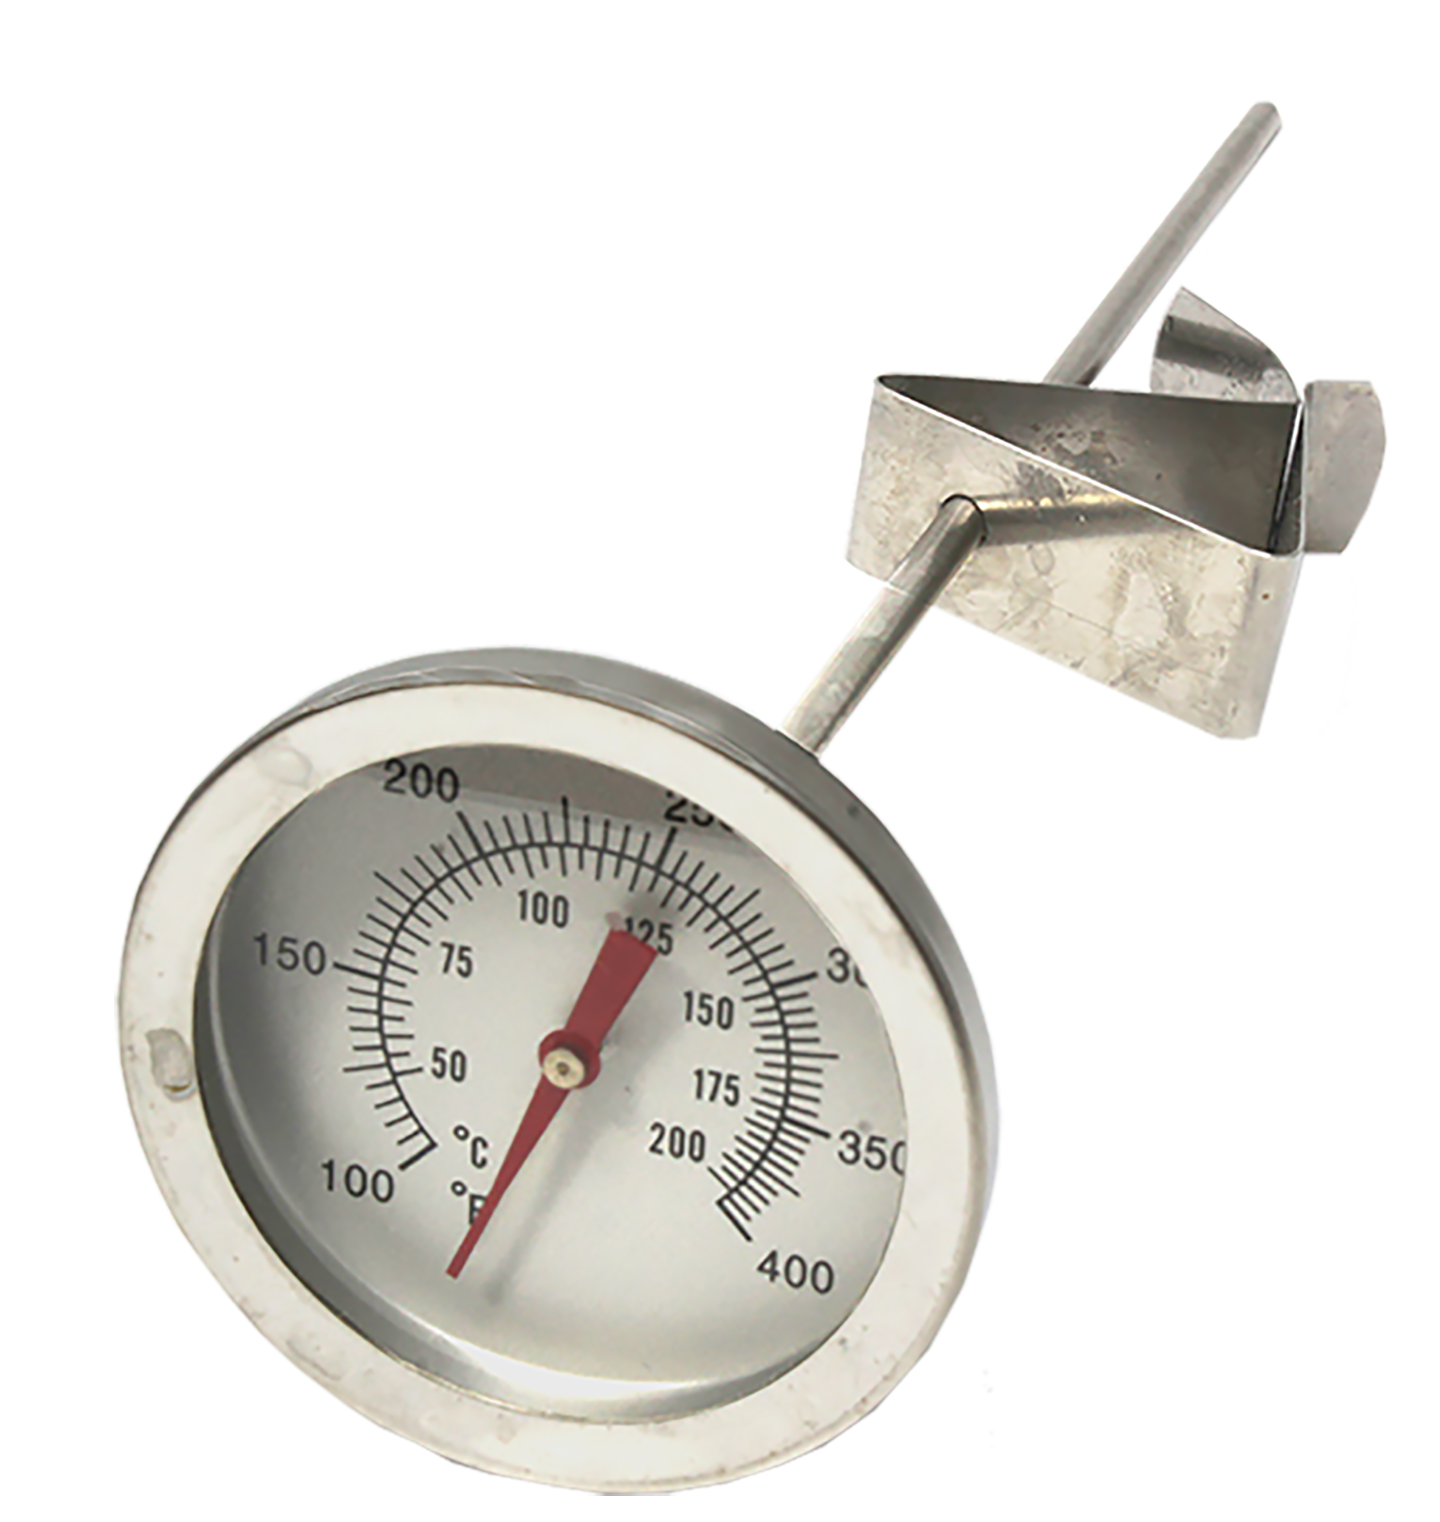 https://www.jbcandcompany.com/images/782%20Thermometer%20333%20Small.png